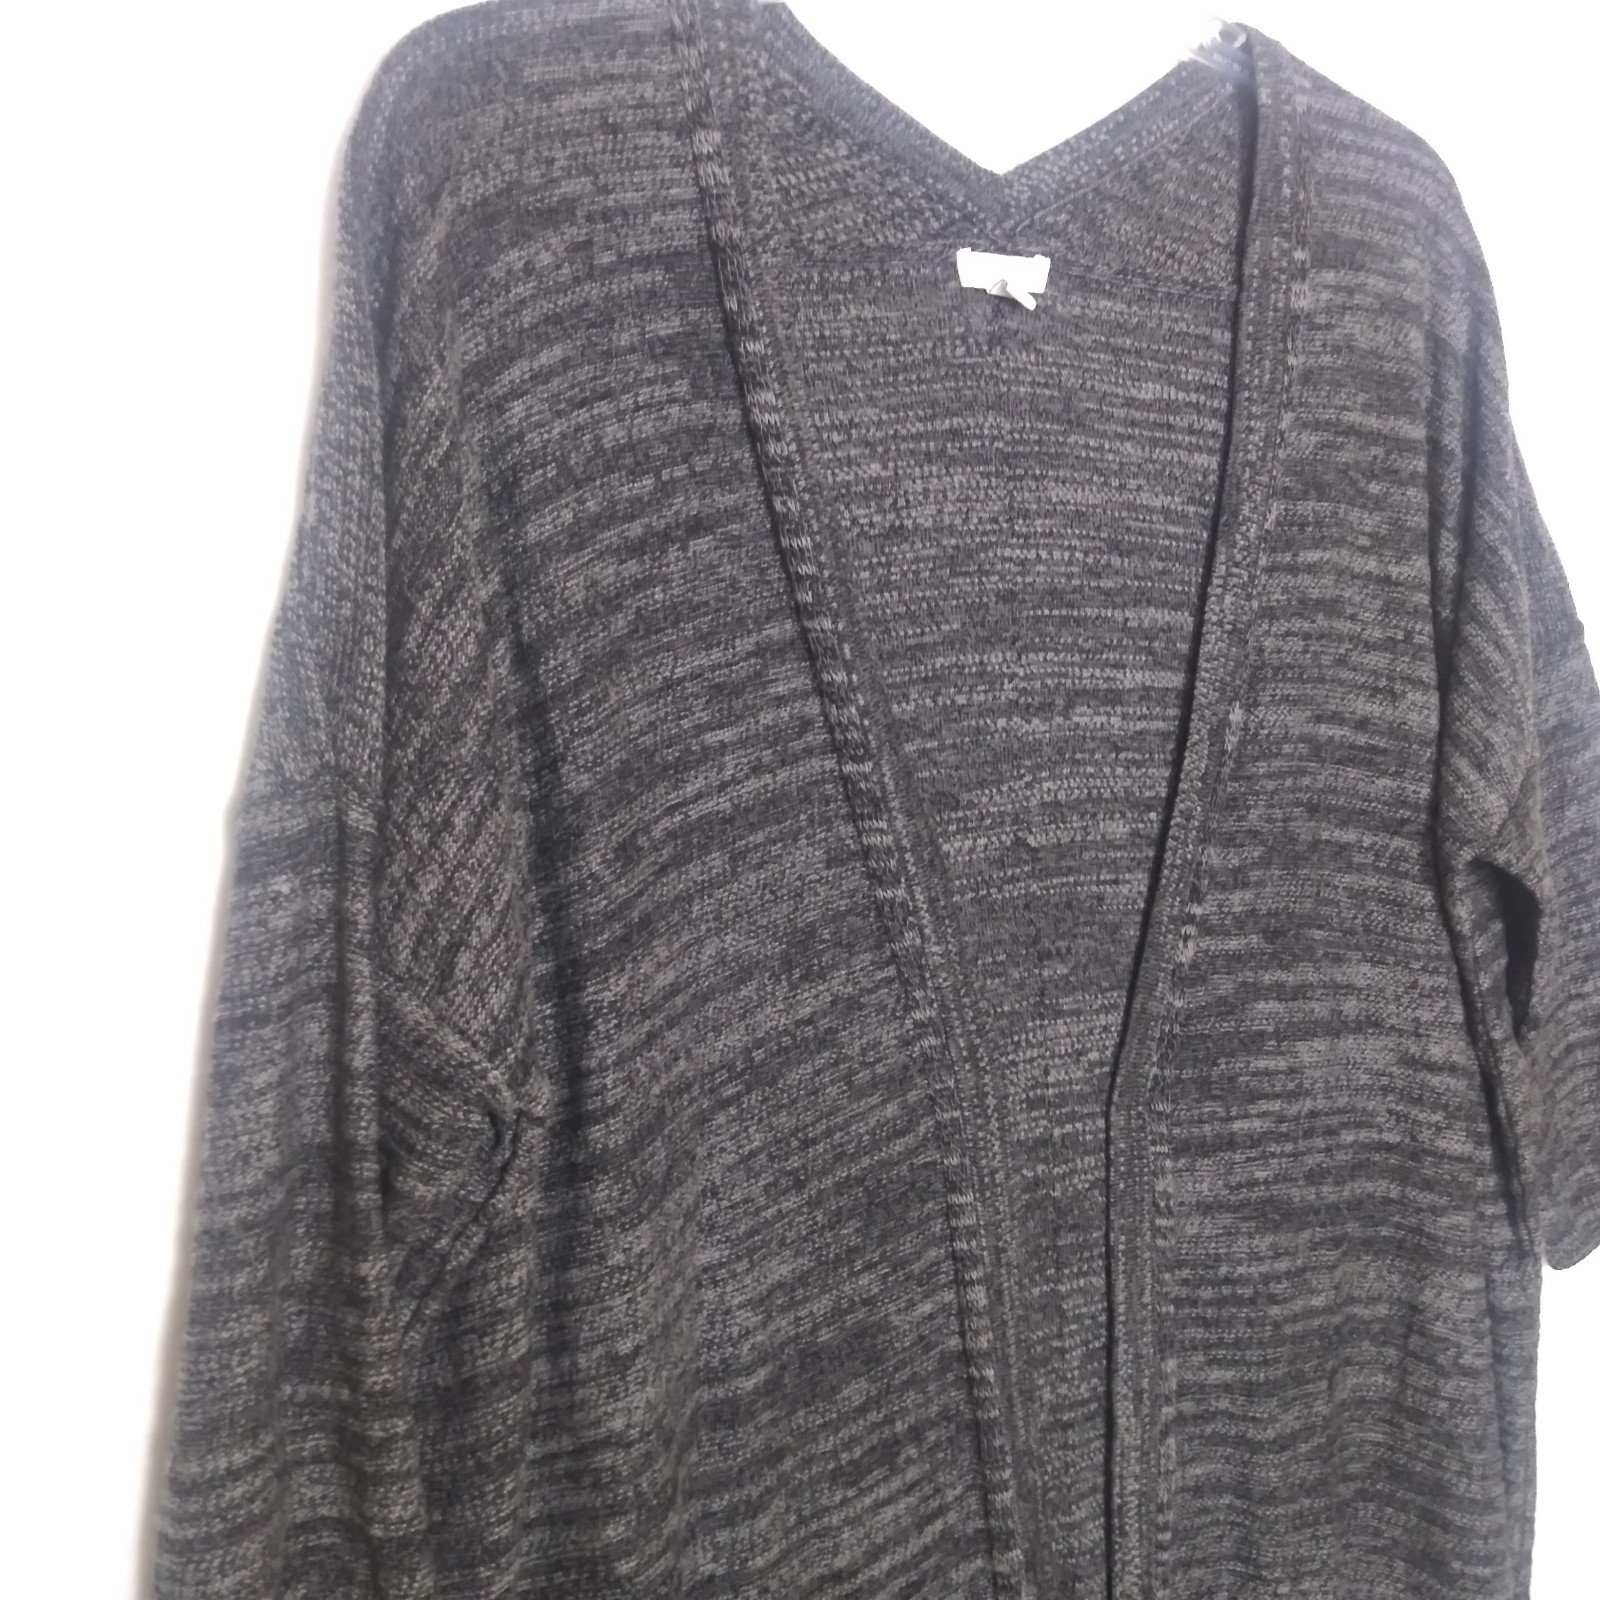 Perfect J. Jill Pure Jill Cardigan Sweater Size M Heather Gray Long Sleeve Open Front Nc7QVq3v1 for sale